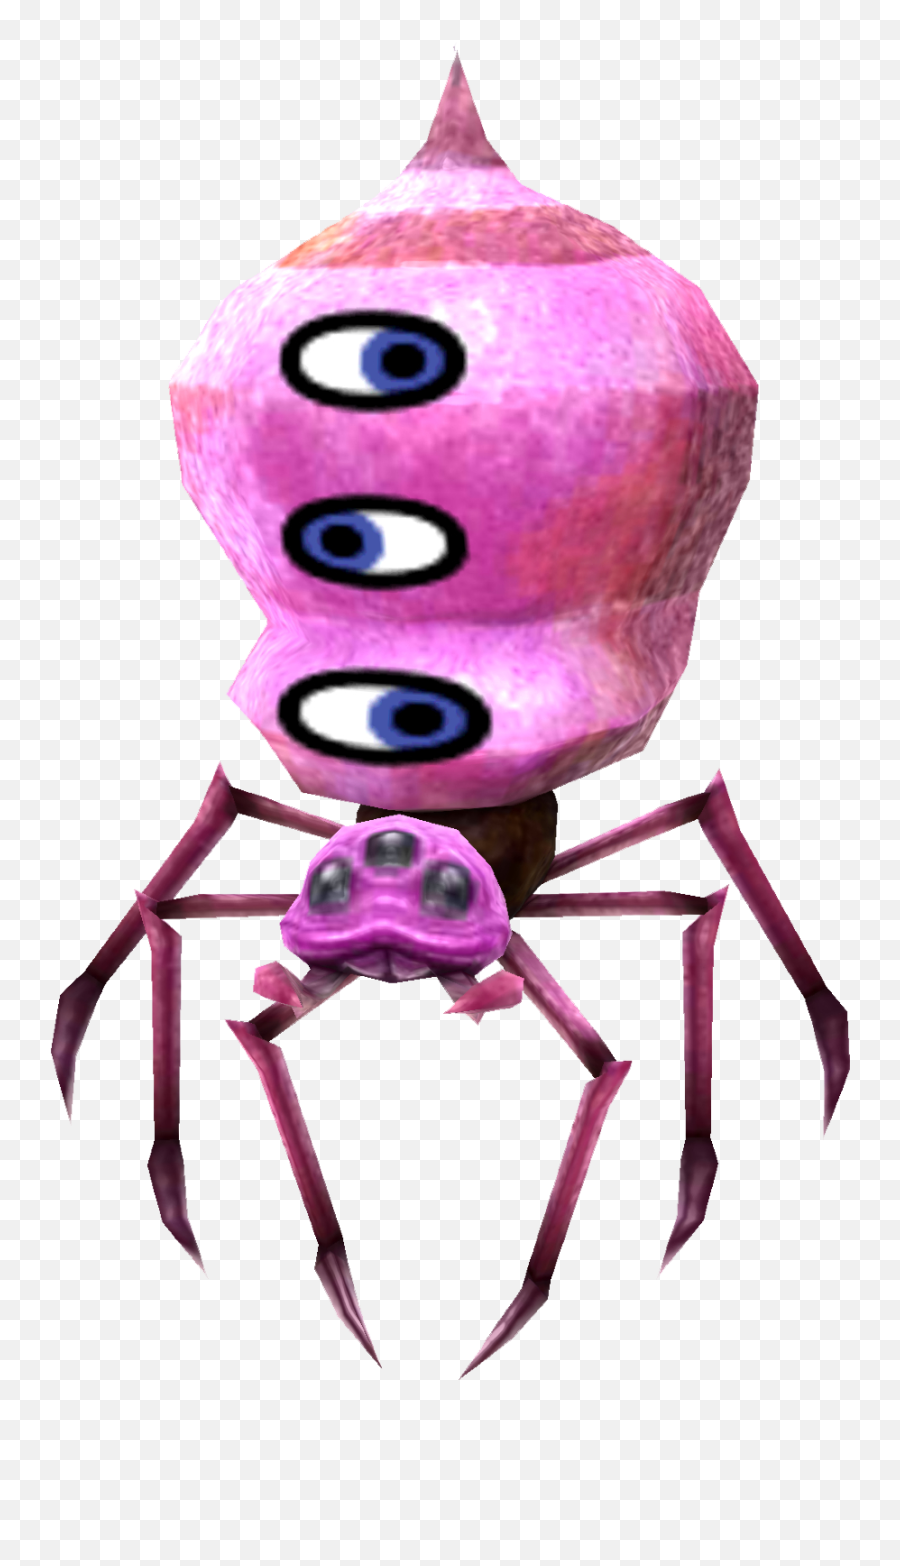 Download Free Png Image - Demon Spiderpng Miitopia Wiki Portable Network Graphics,Spider Png